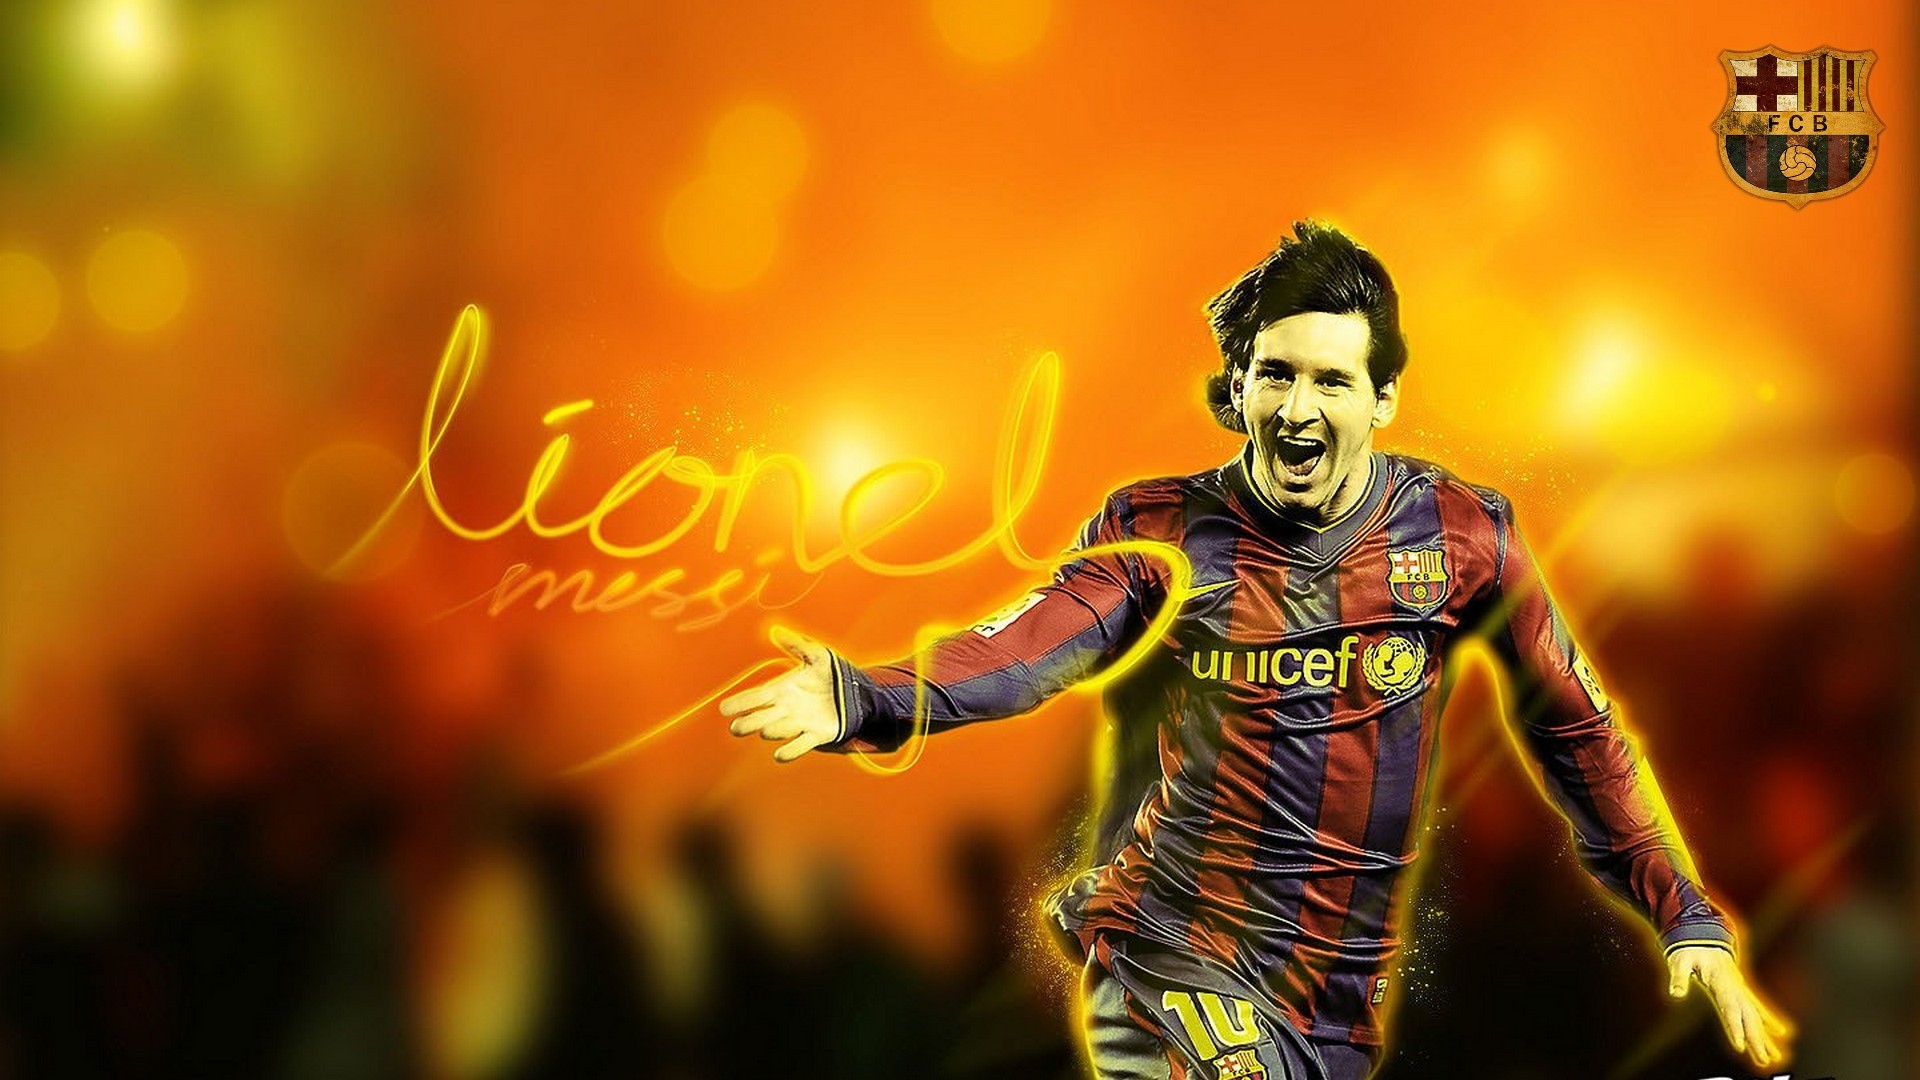 Windows Wallpaper Leo Messi With Resolution 1920X1080 pixel. You can make this wallpaper for your Mac or Windows Desktop Background, iPhone, Android or Tablet and another Smartphone device for free